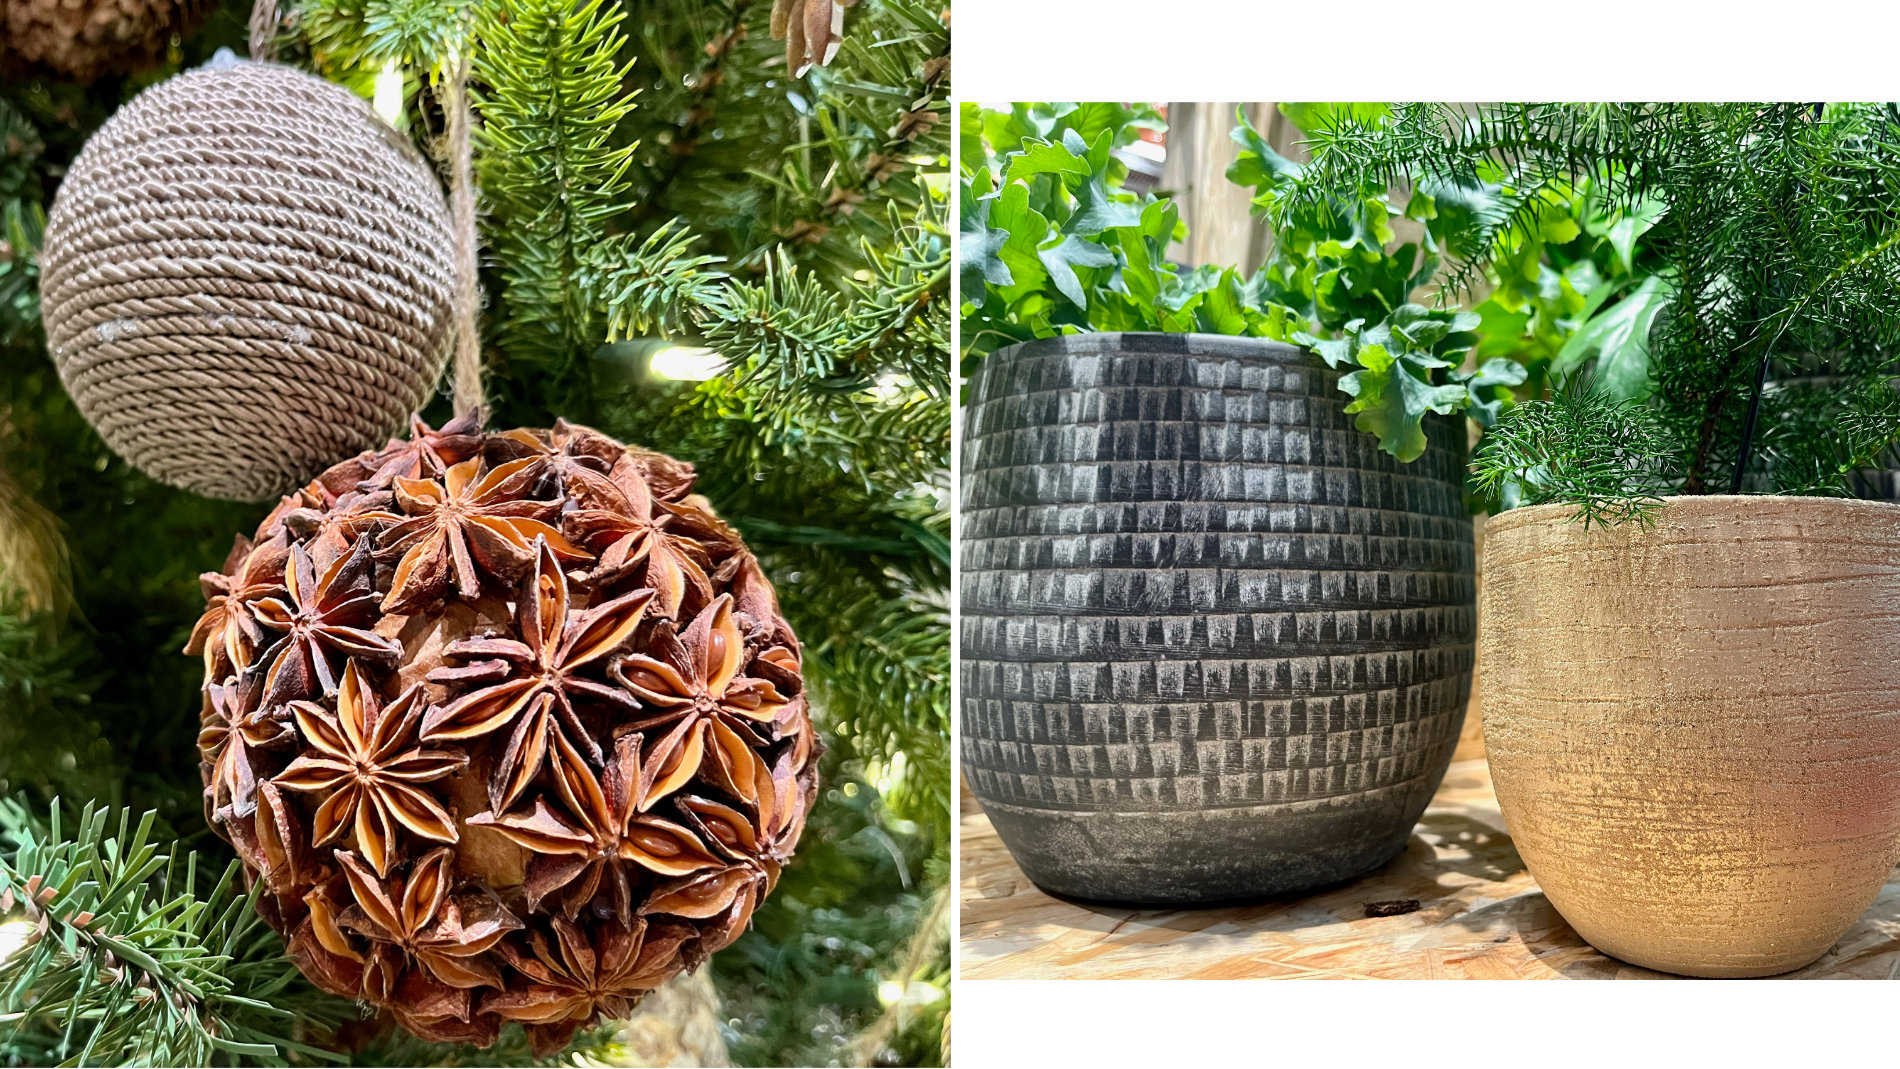 Tree ornaments made of raffia and carnations by ShiShi and plant pots made of ceramic and clay by Passion for Pottery